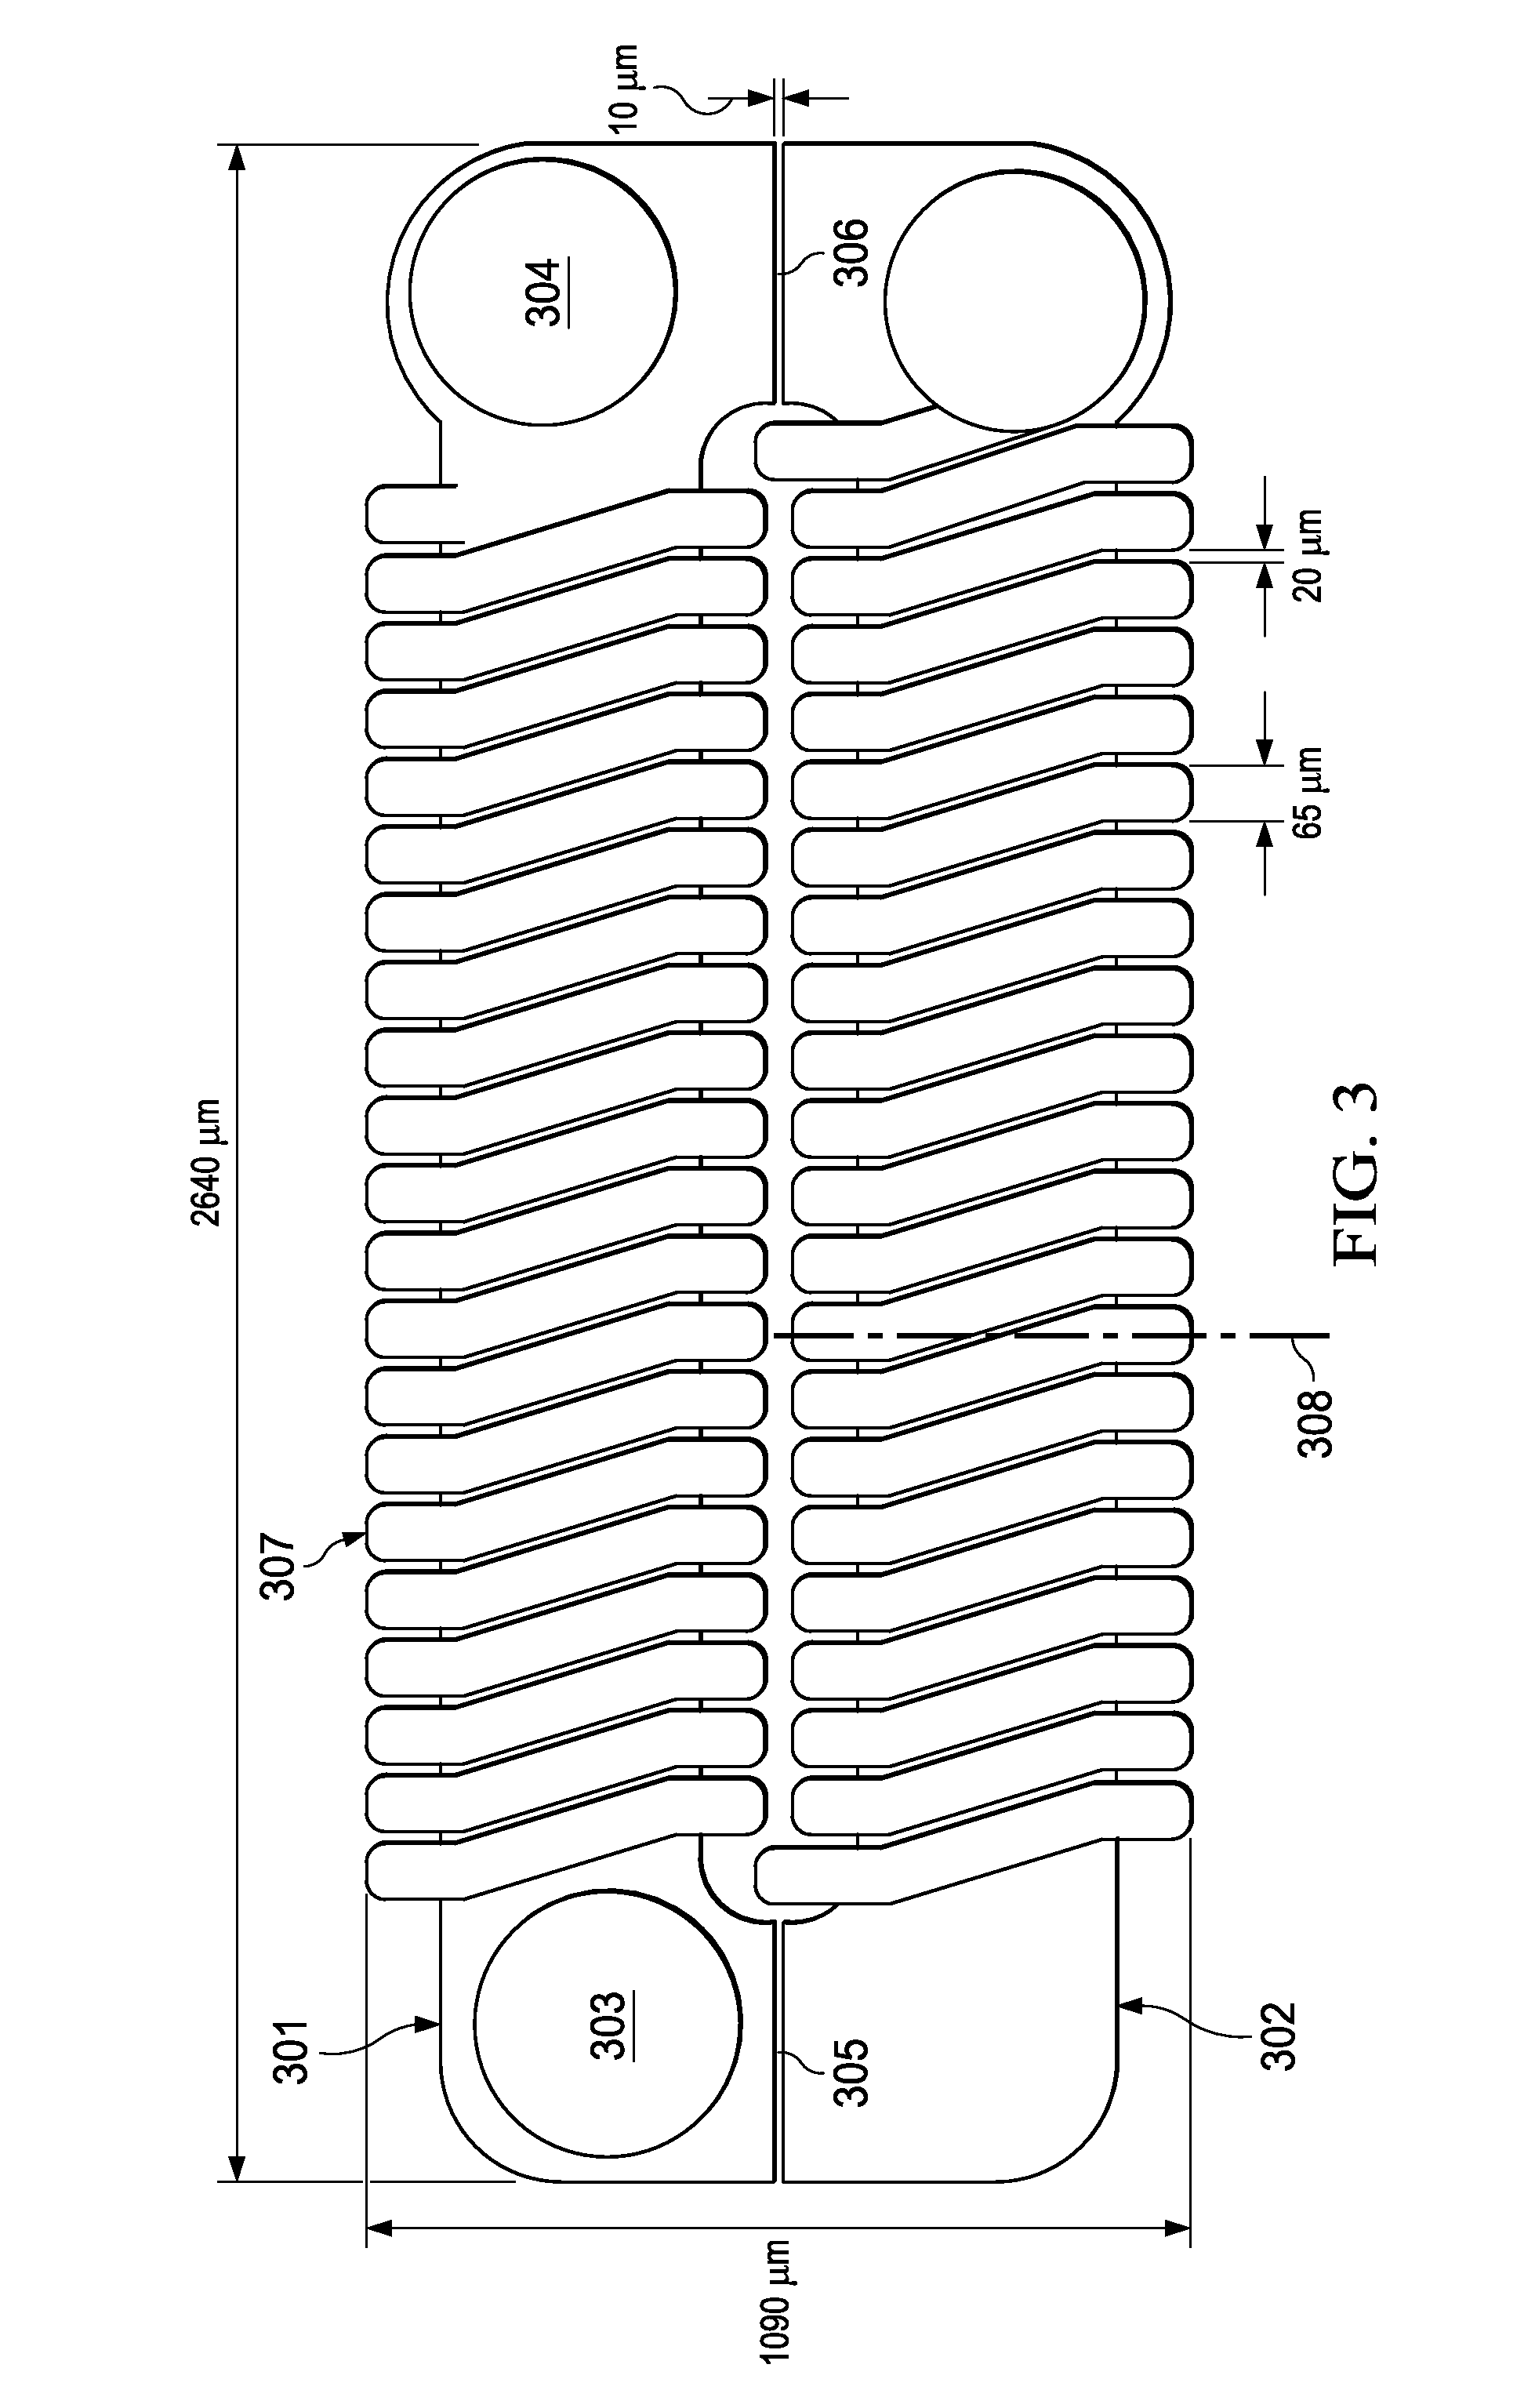 Micromagnetic device and method of forming the same